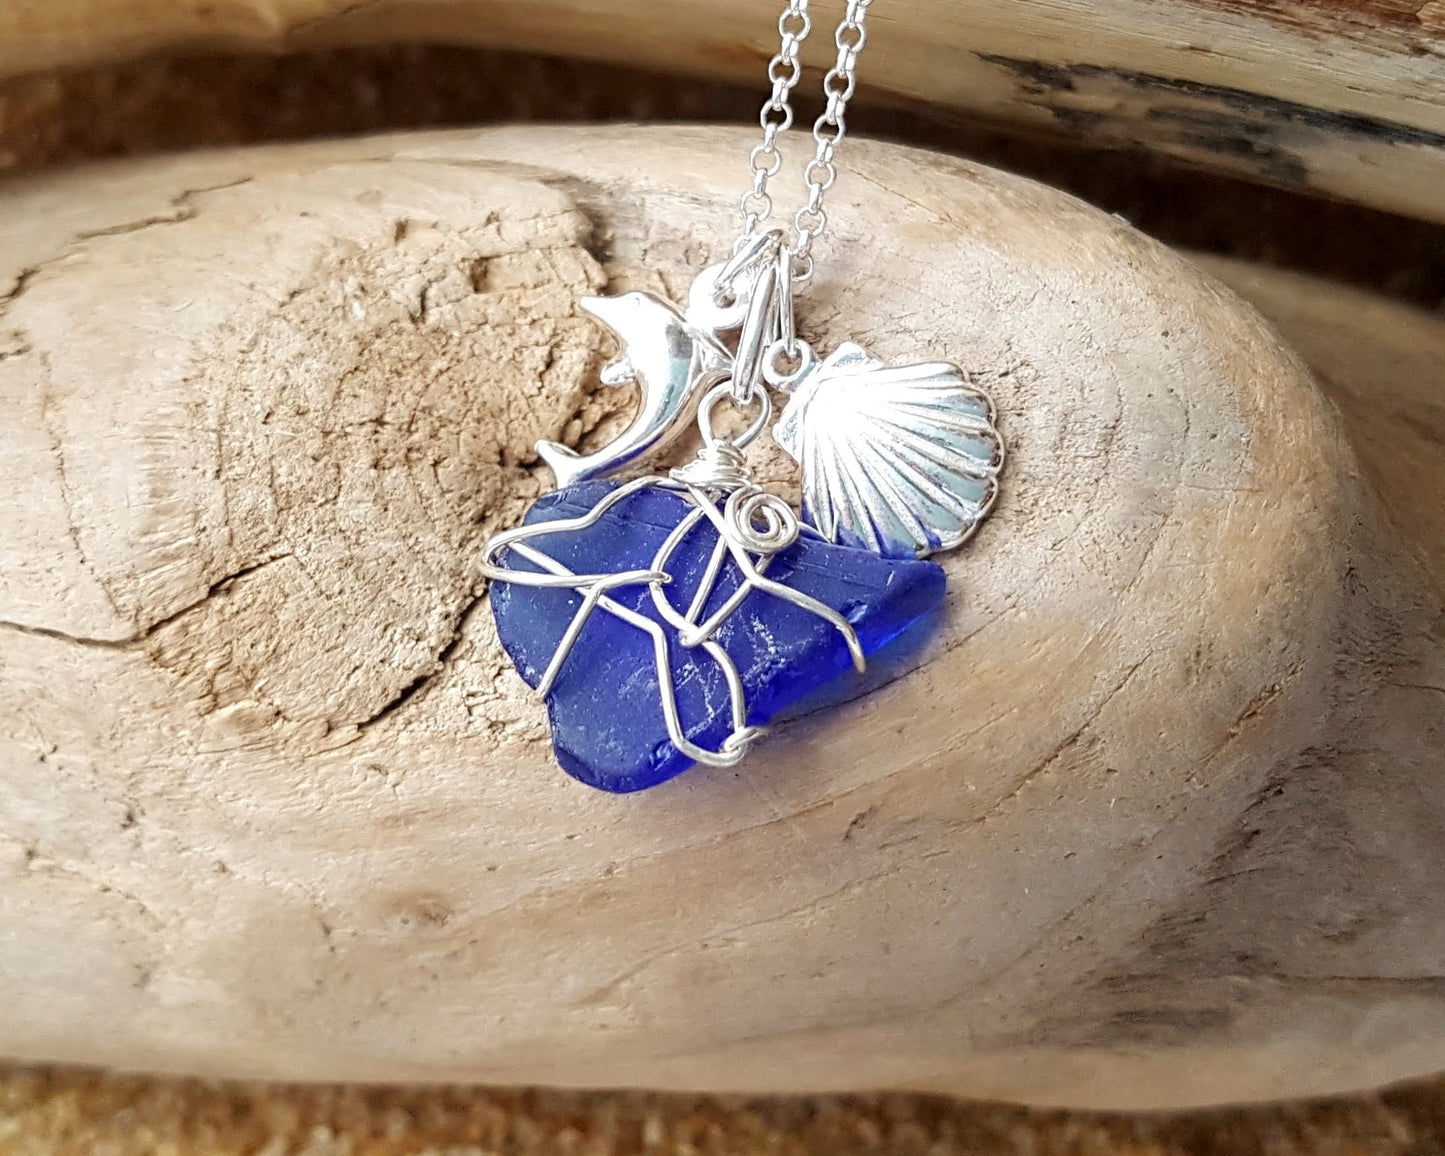 Blue Beach Glass, Shell, Dolphin Necklace, Sterling Silver, Wire Wrapped Pendant on Chain